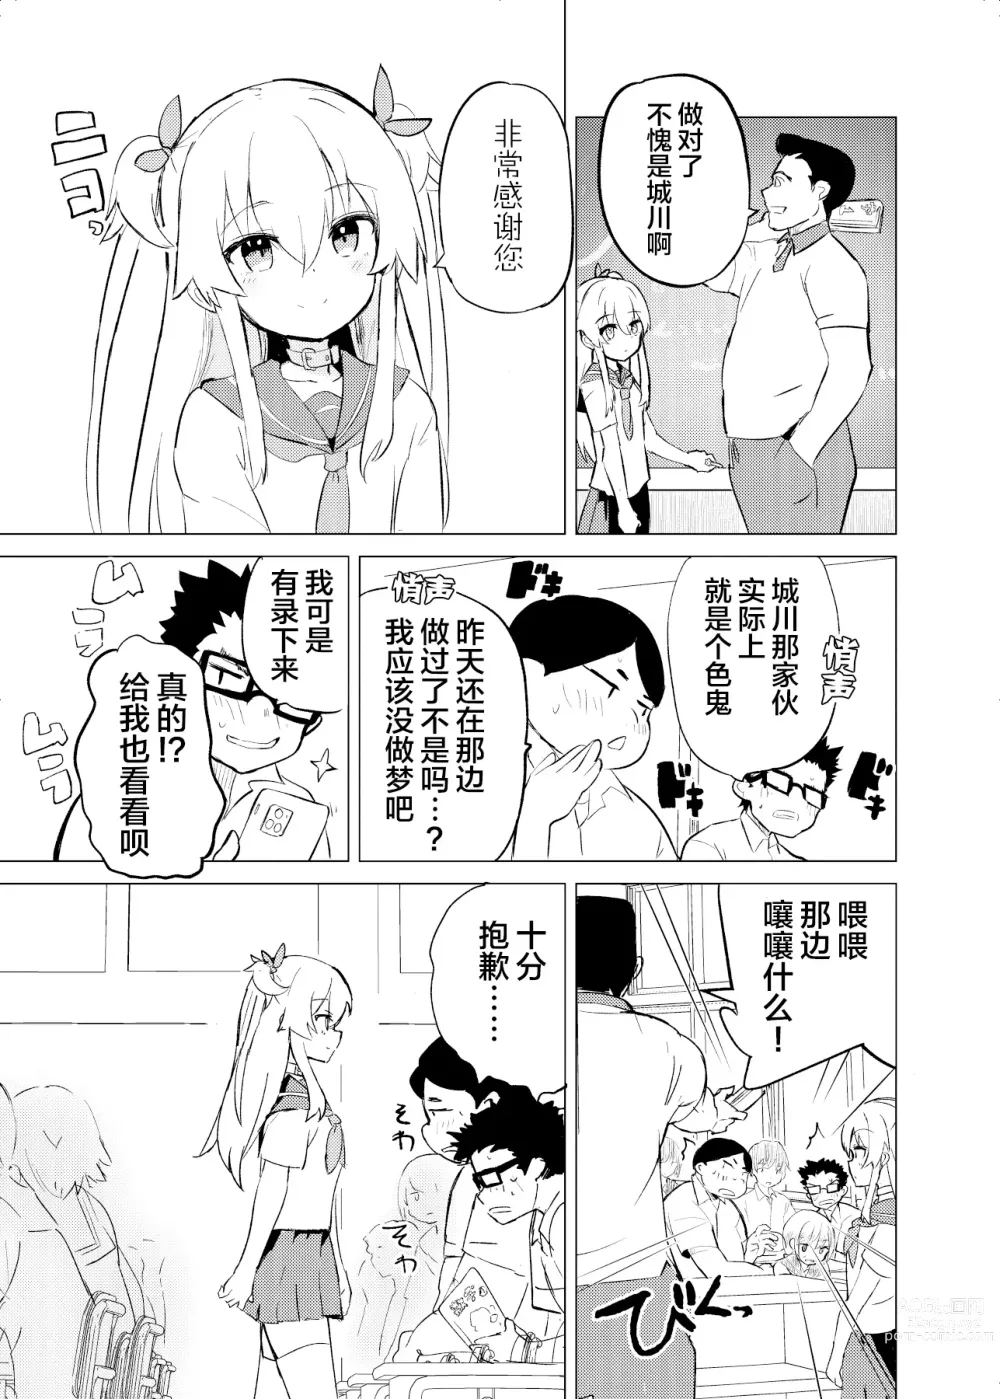 Page 4 of doujinshi S.S.S.DI2